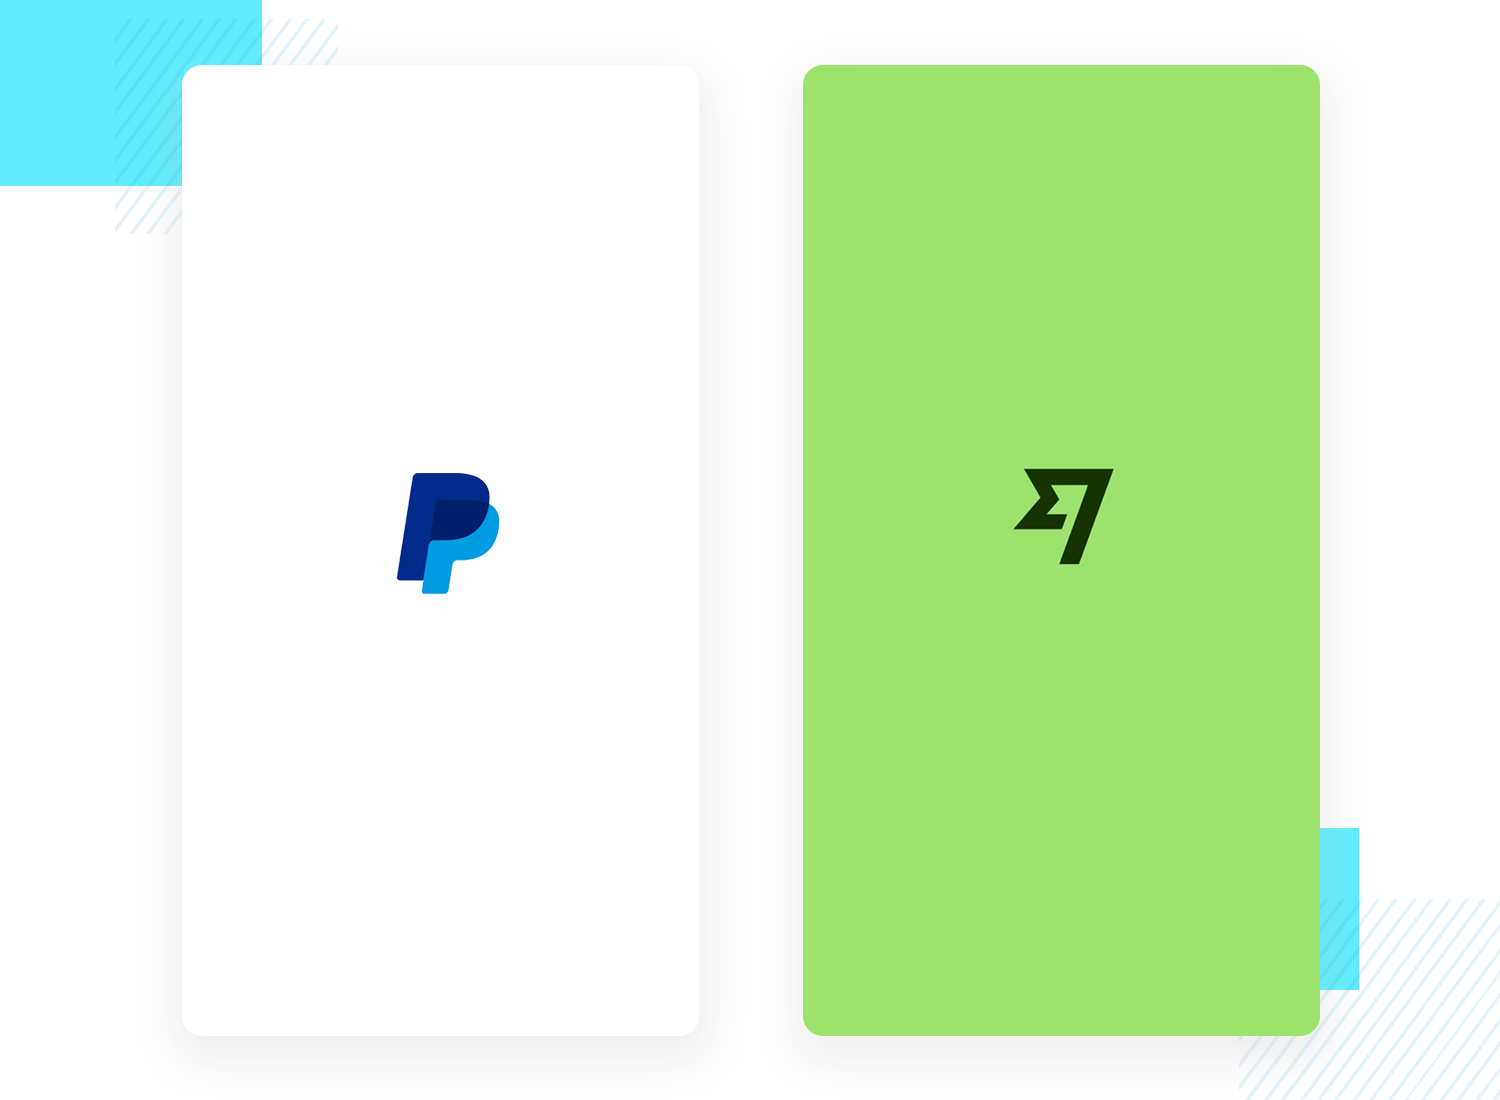 Paypal and Wise splash screen examples